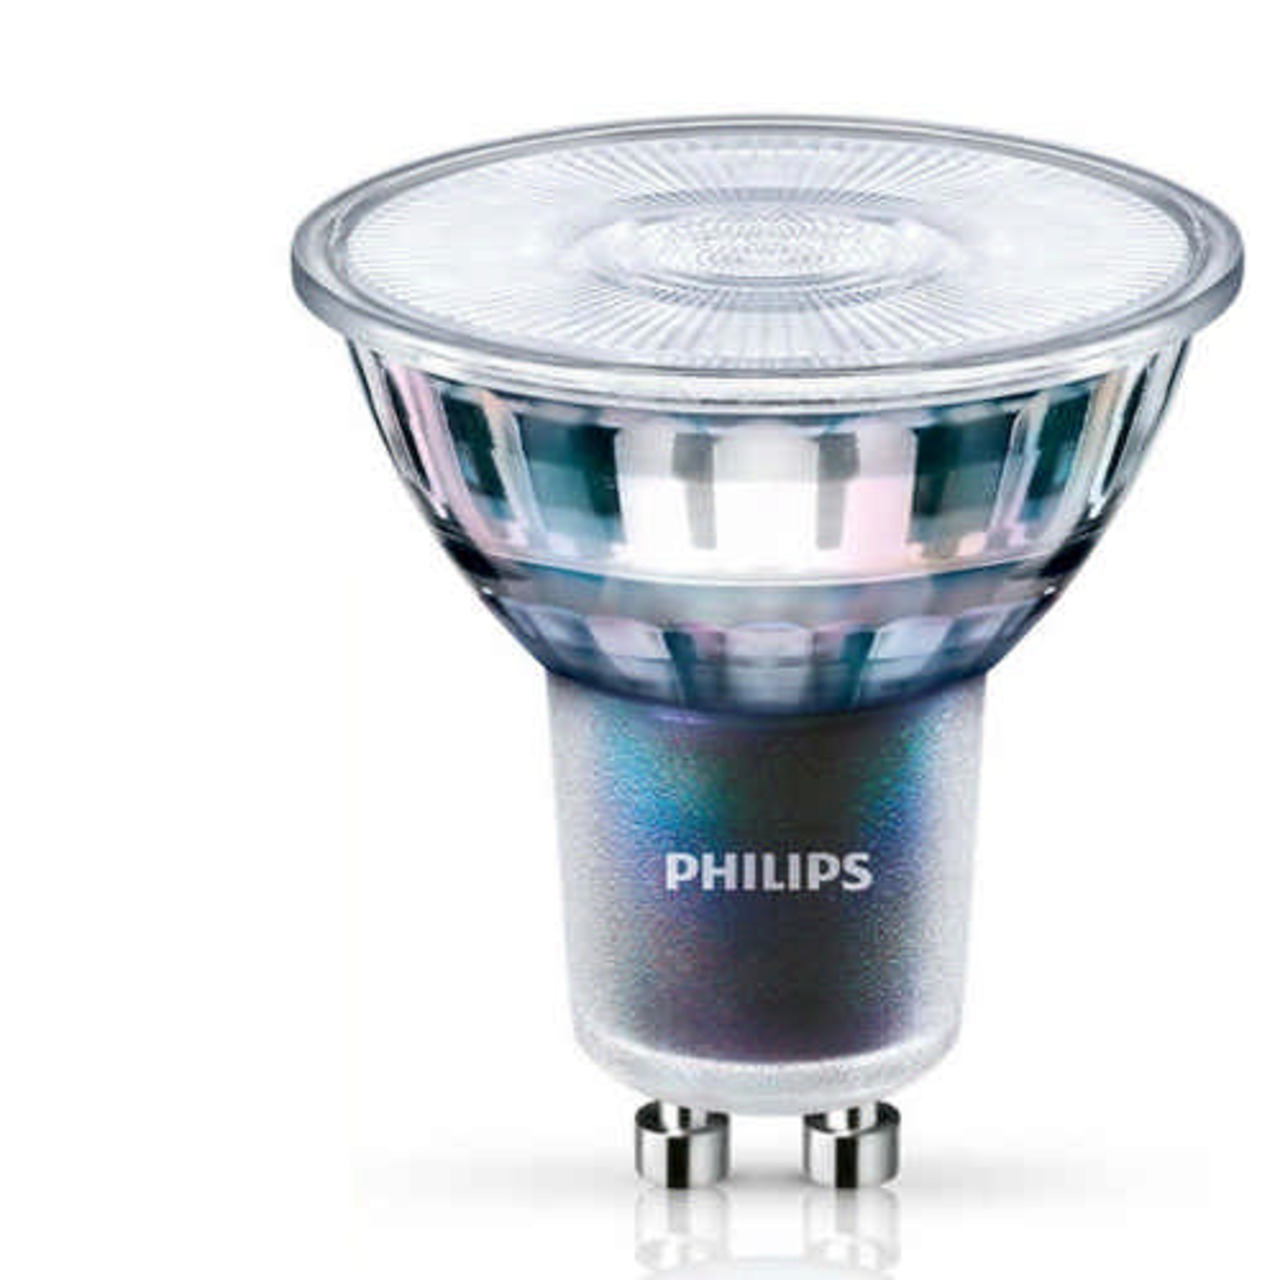 Philips MASTER ExpertColor 5-5-W-GU10-LED-Lampe- 375 lm- 97 Ra- 25- 3000K- warmweiss- dimmbar